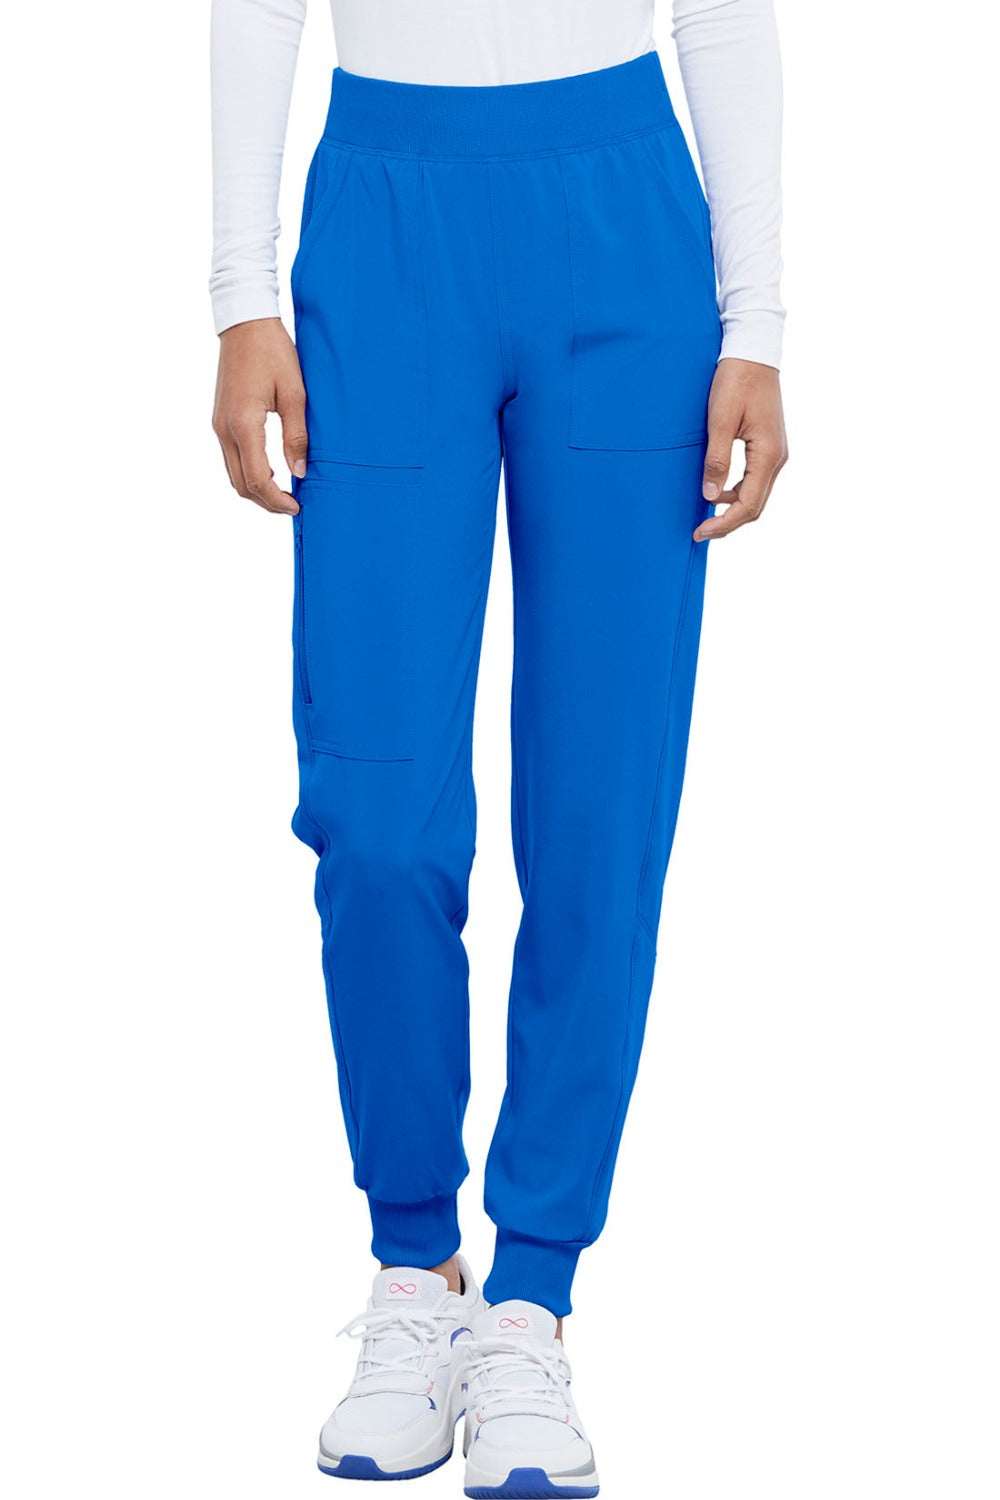 Cherokee Allura Petite Scrub Pant Pull On Jogger in Royal at Parker's Clothing and Shoes.